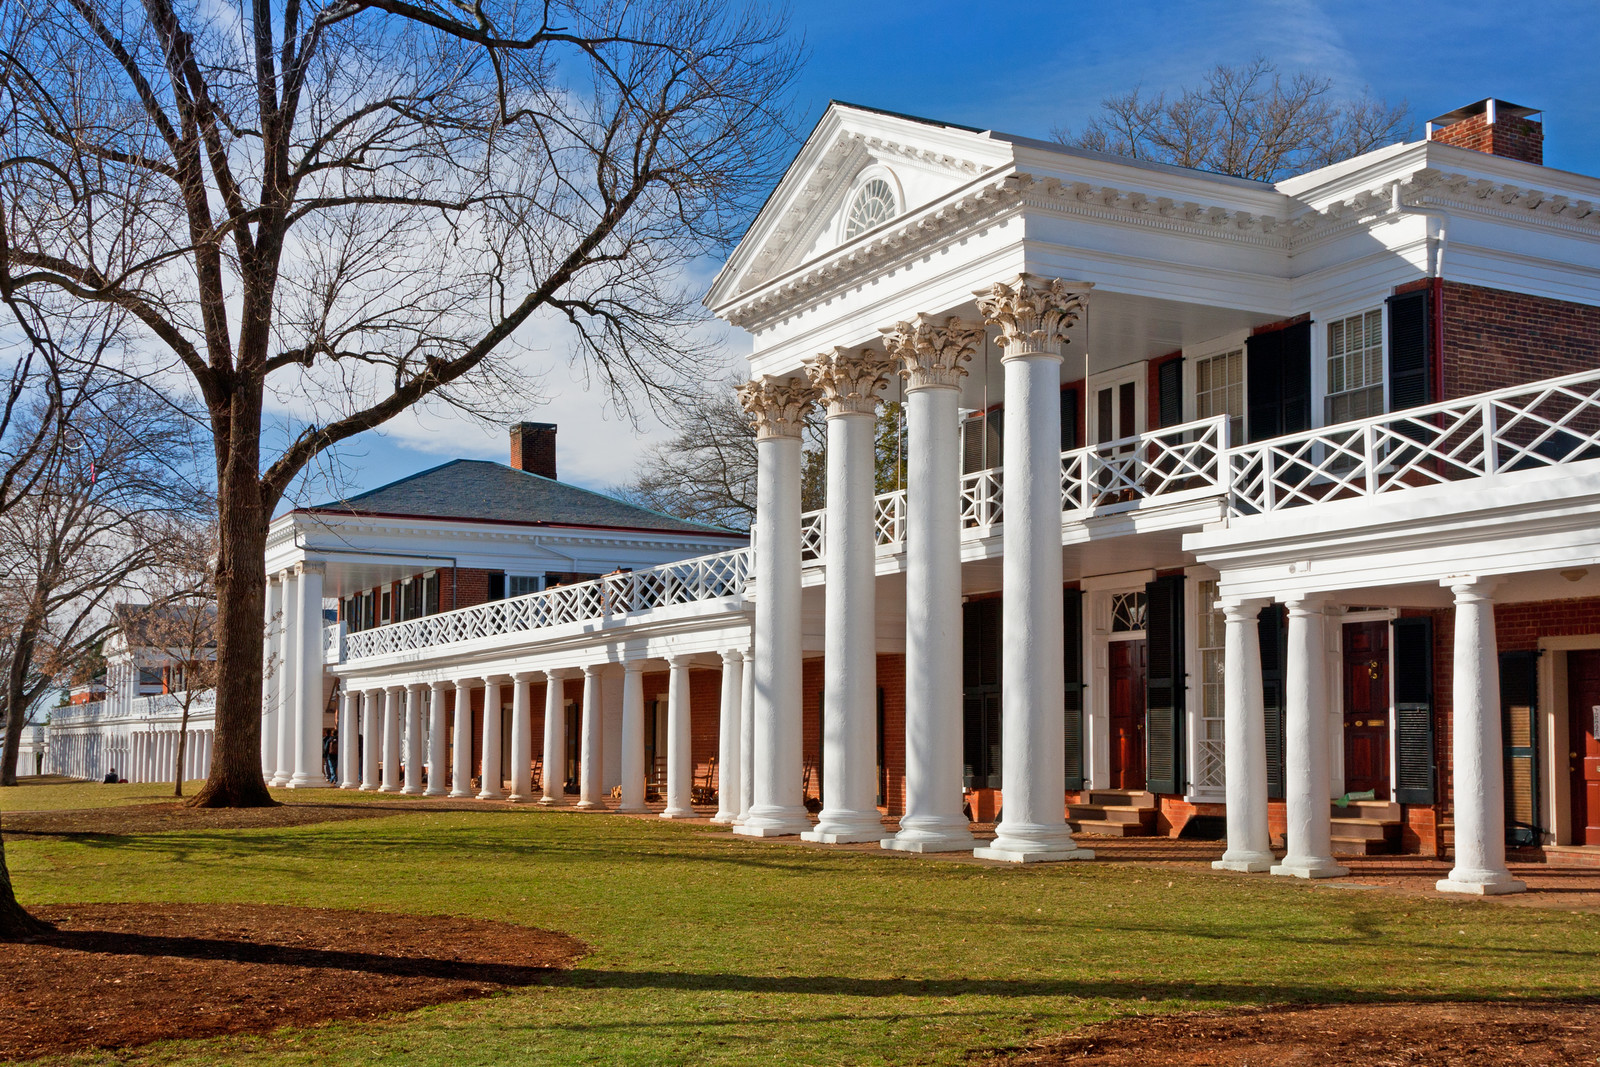 Academical village at the university of Virginia, long brick apartment building with large white pillars and balcony, blue skies and green grass.